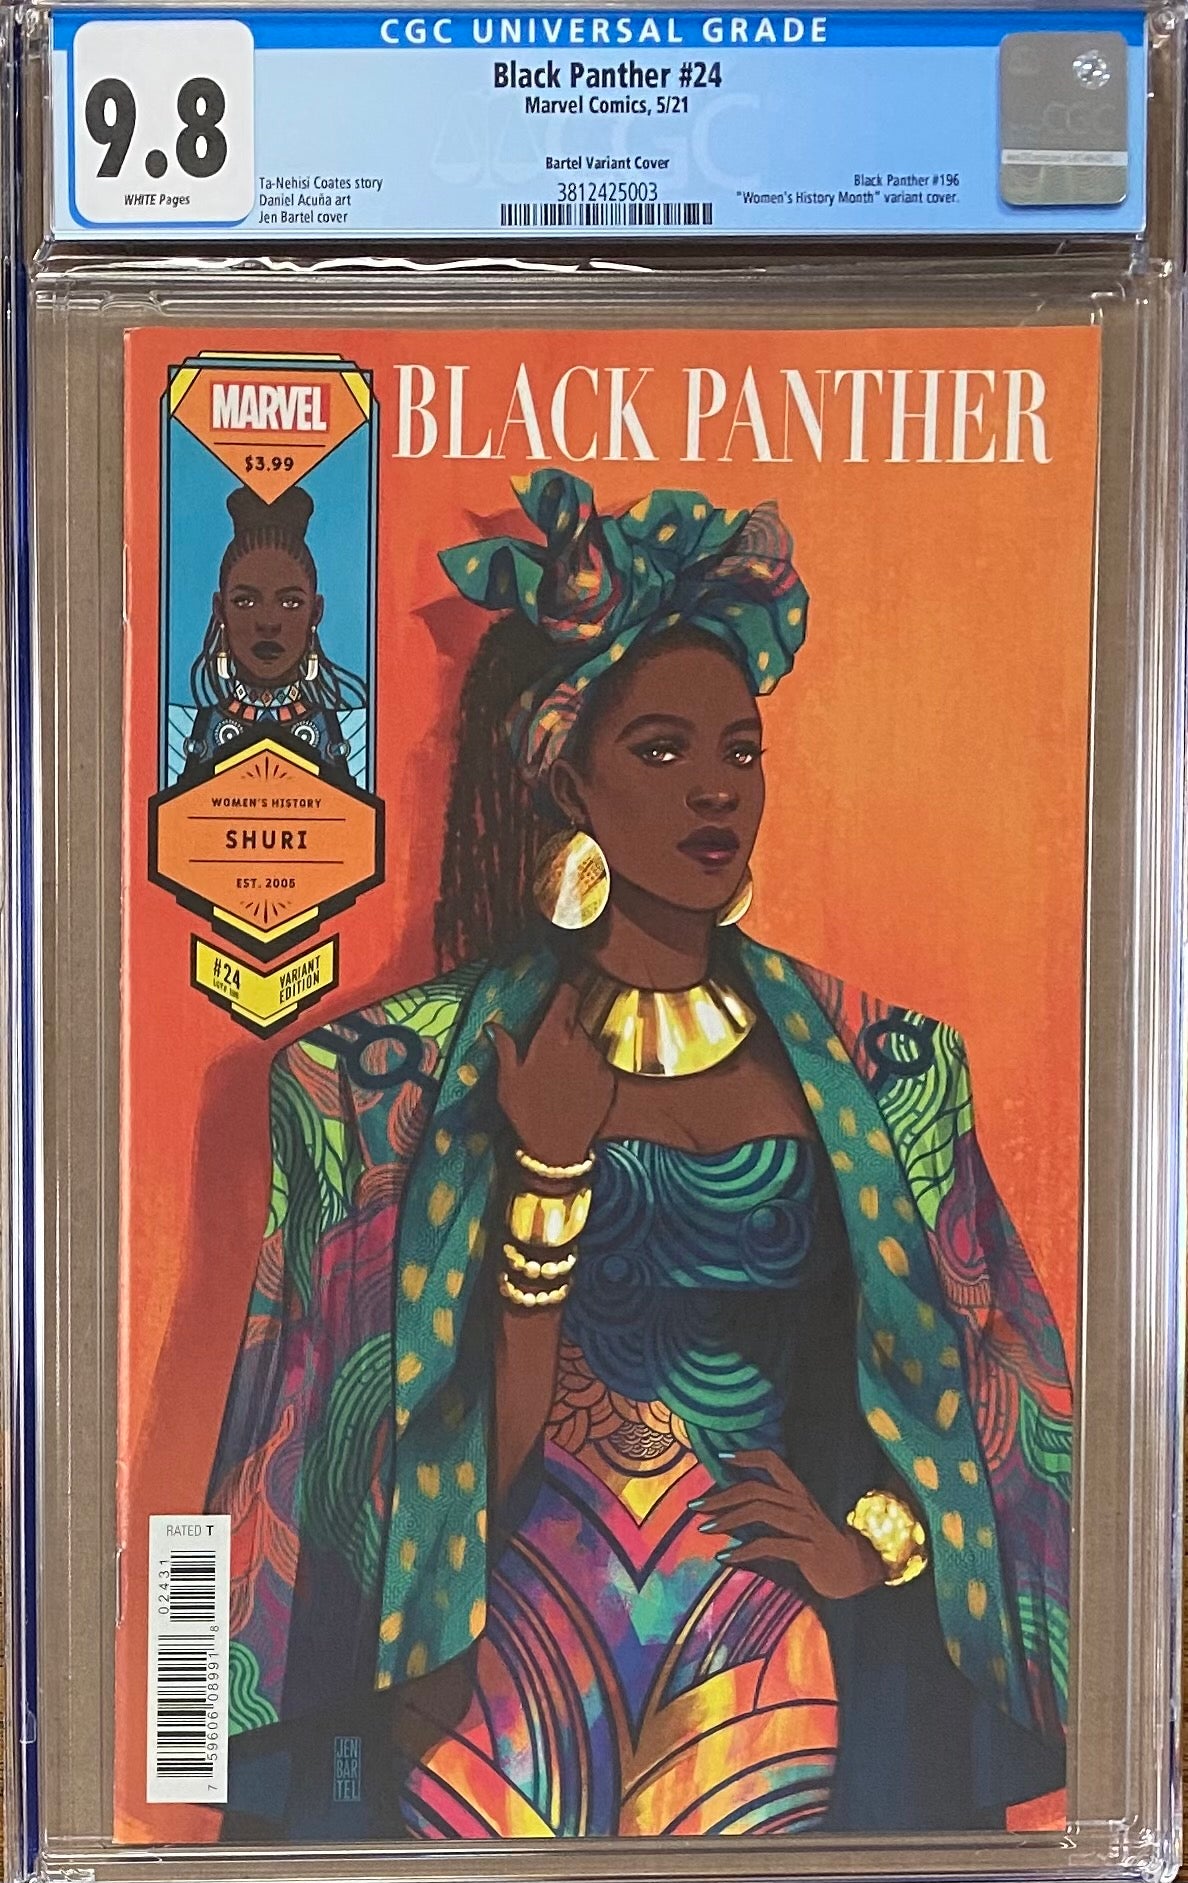 Black Panther #24 Bartel "Women's History Month" Variant CGC 9.8